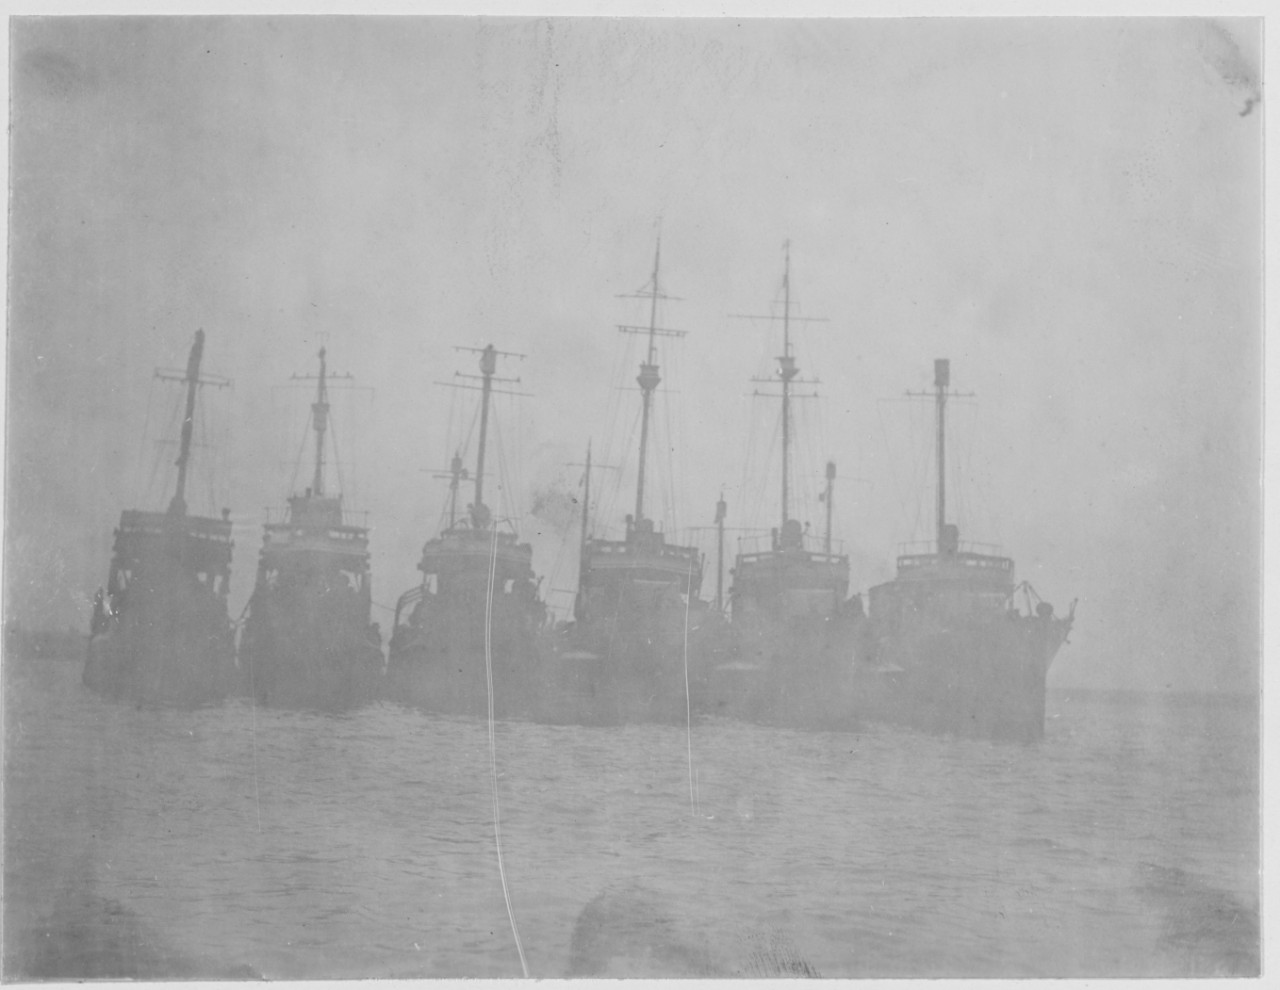 Group of U.S. Destroyers